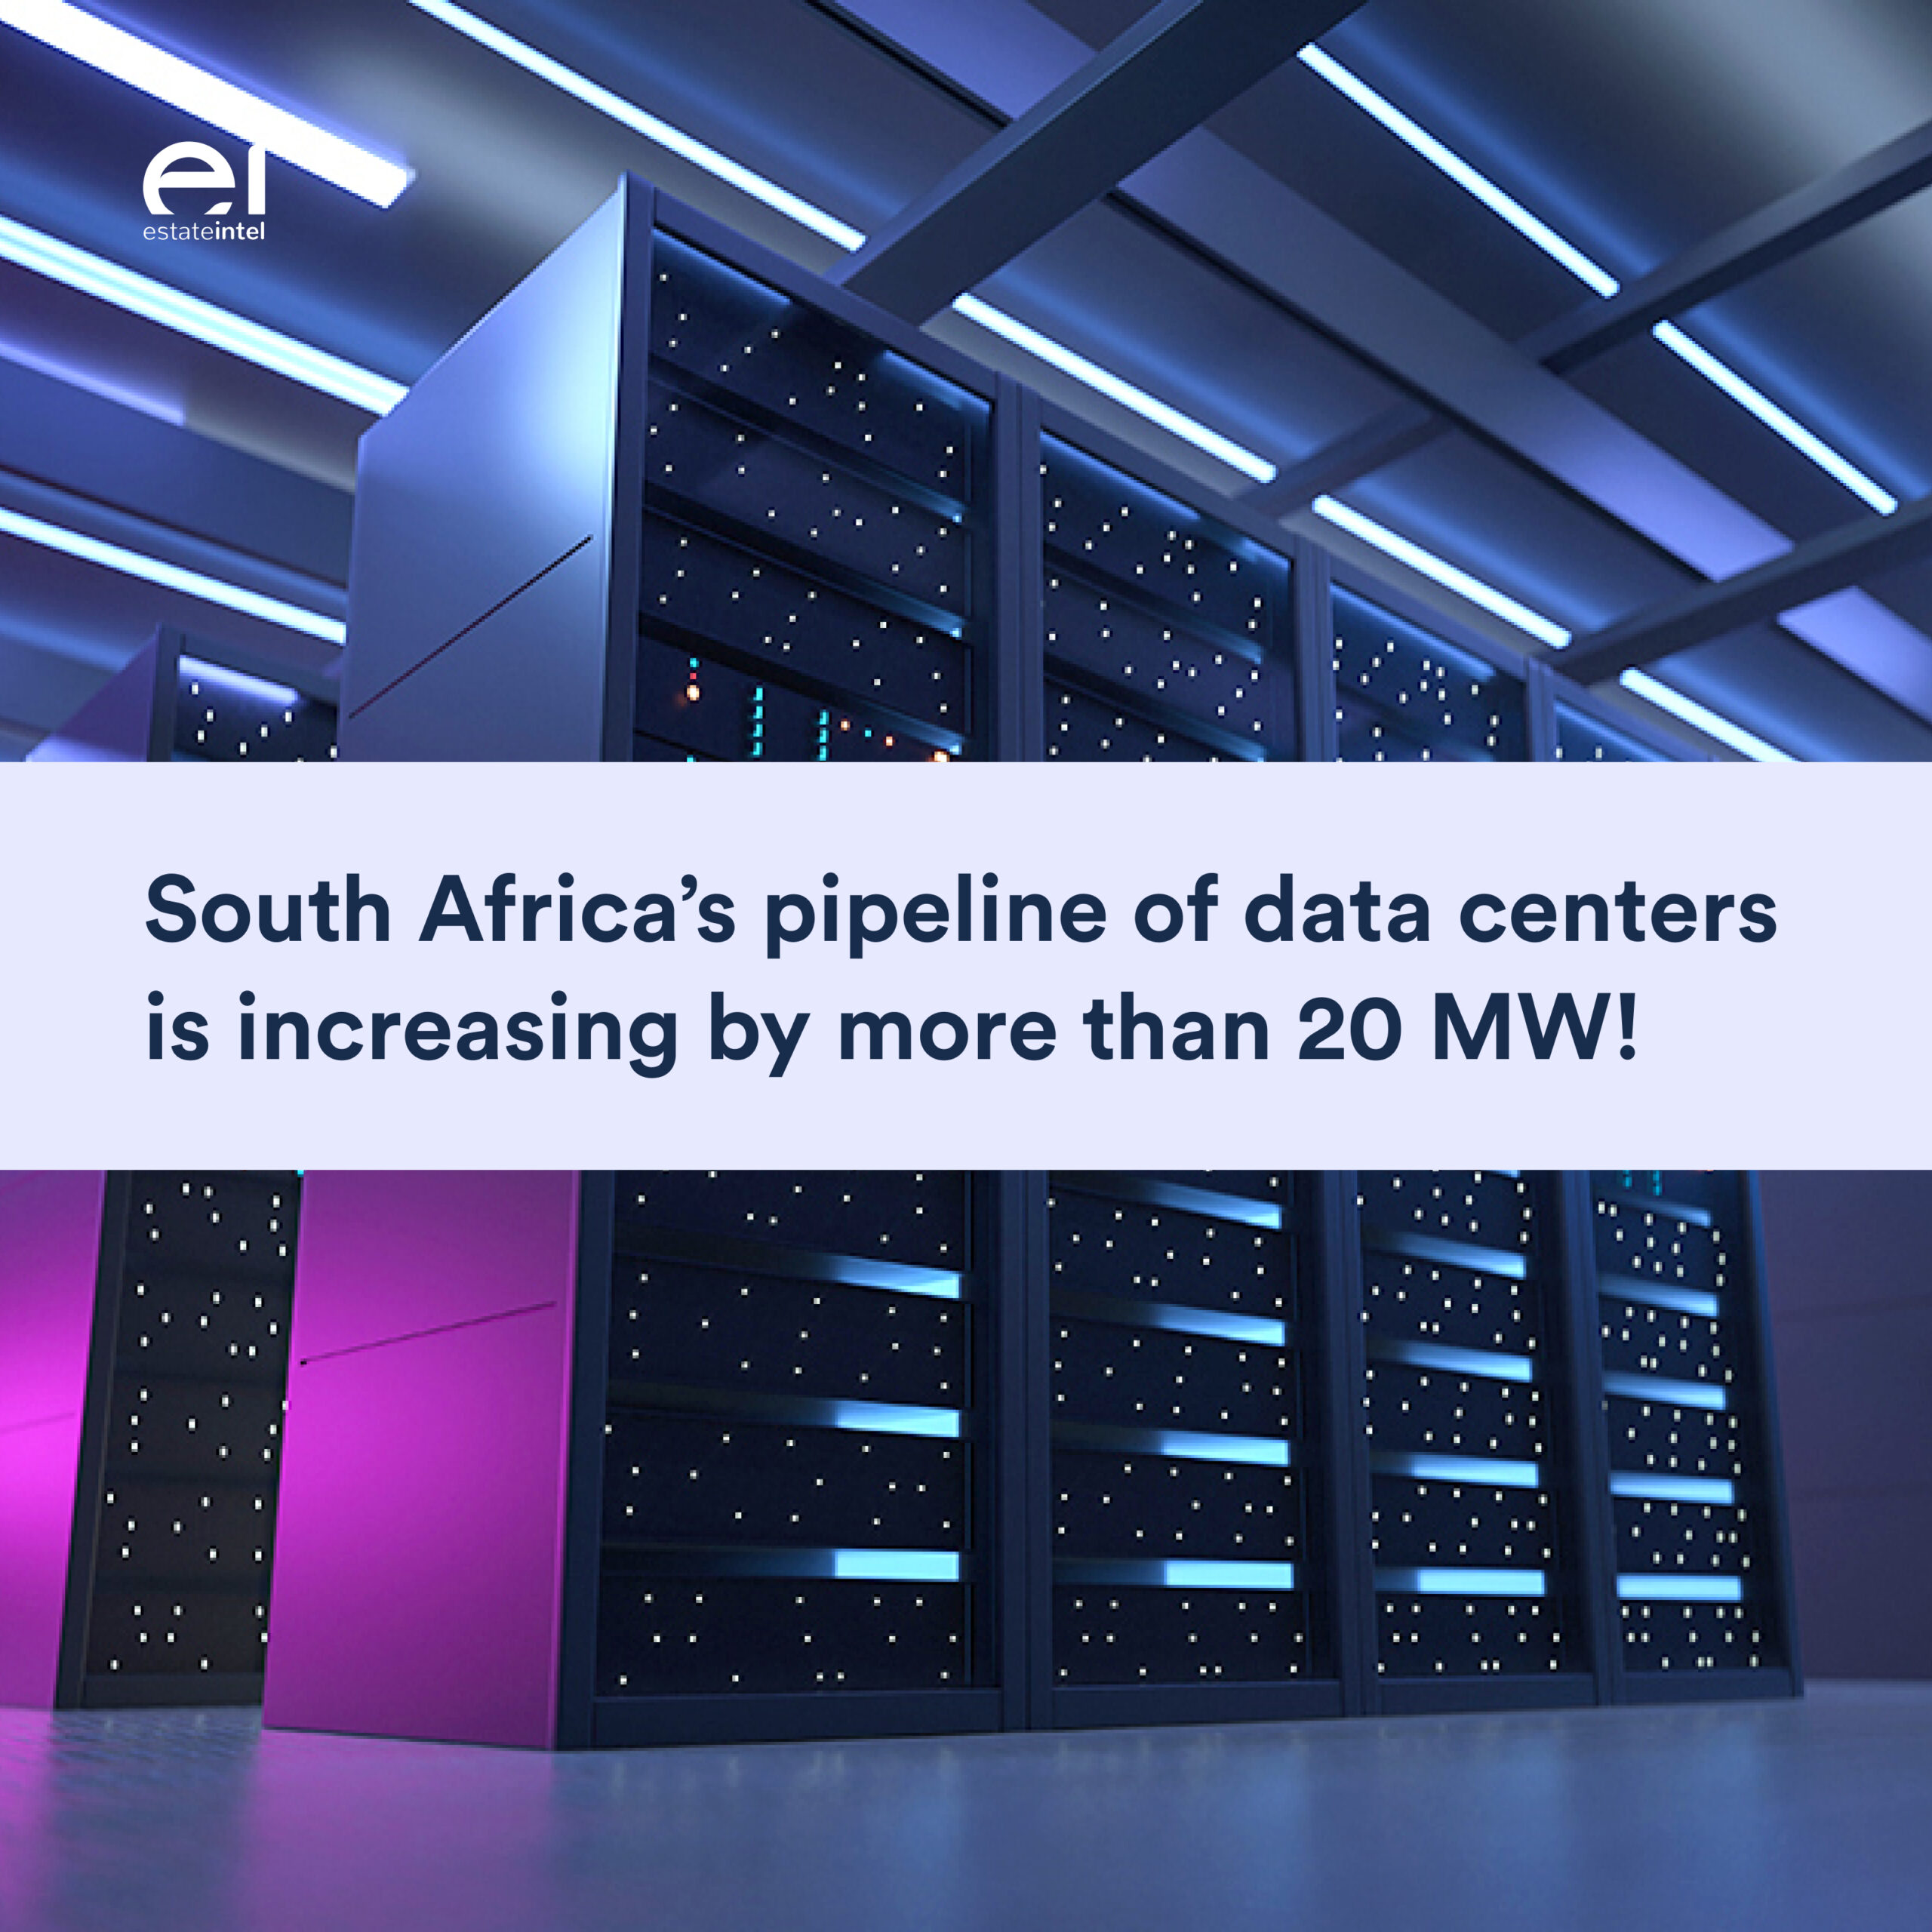 South Africa’s pipeline of data centers is increasing by more than 20 MW!